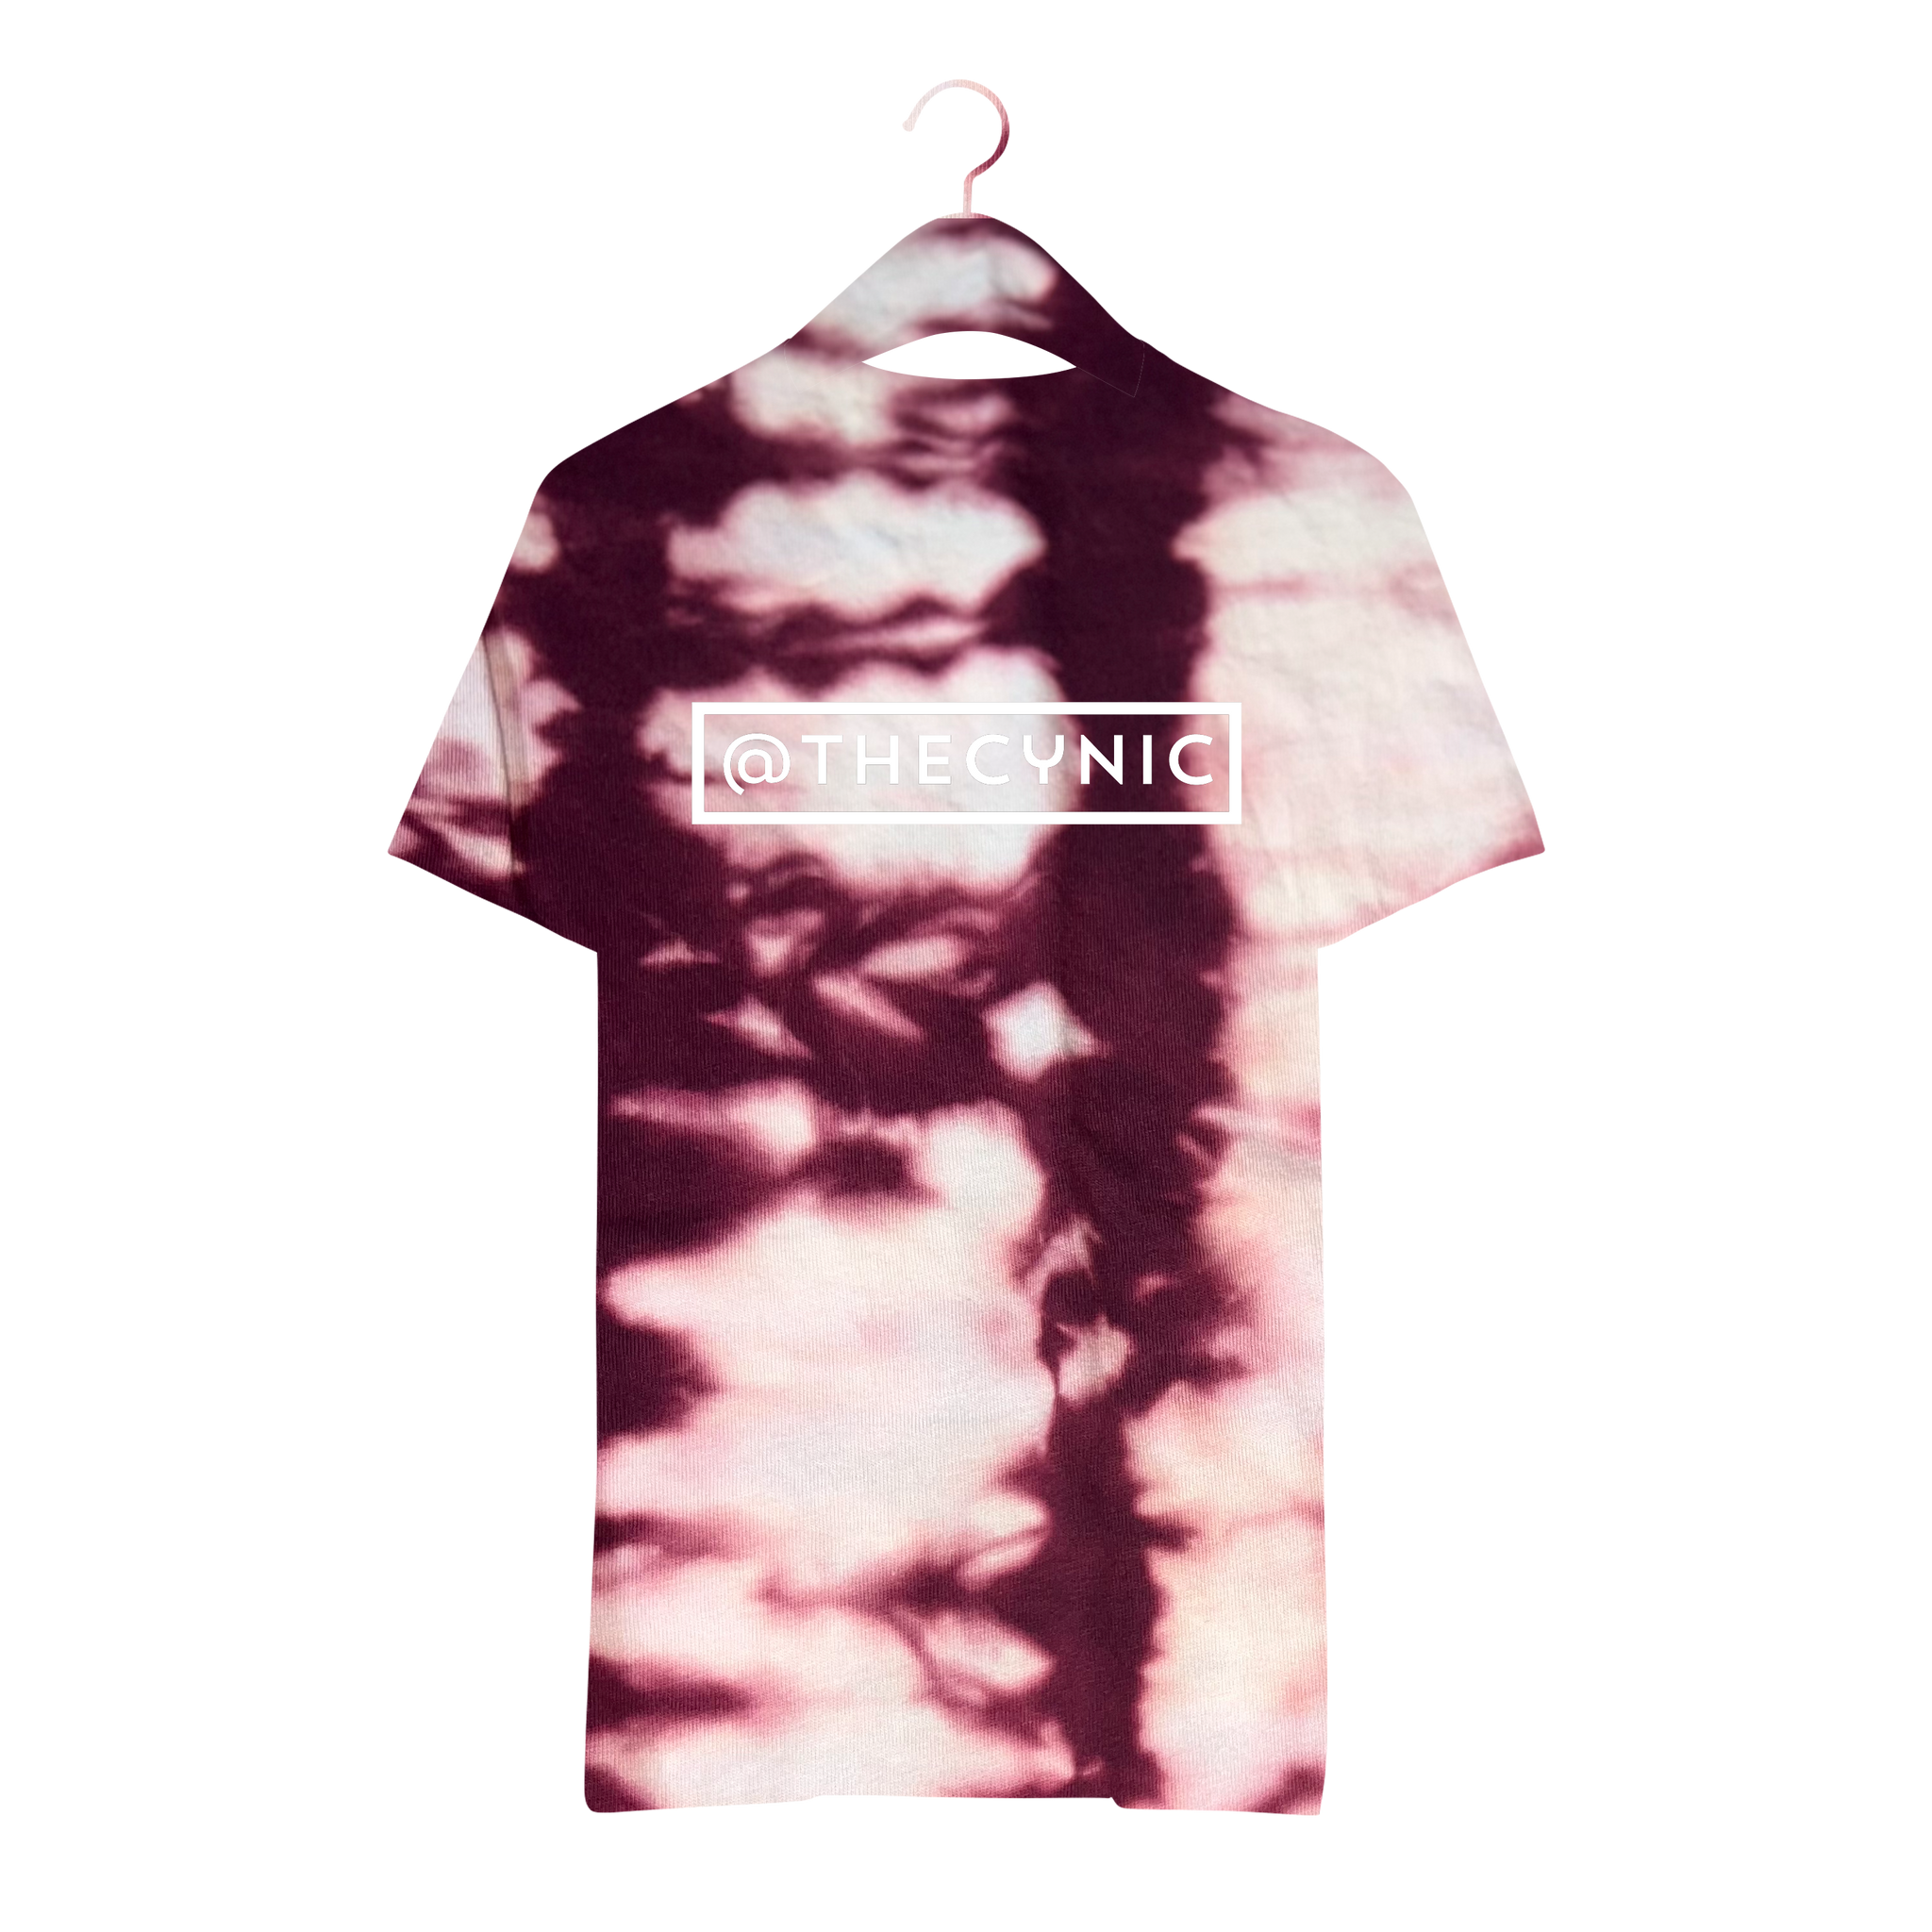 THE CYNIC - SIGNATURE COLLECTION Unisex Tee